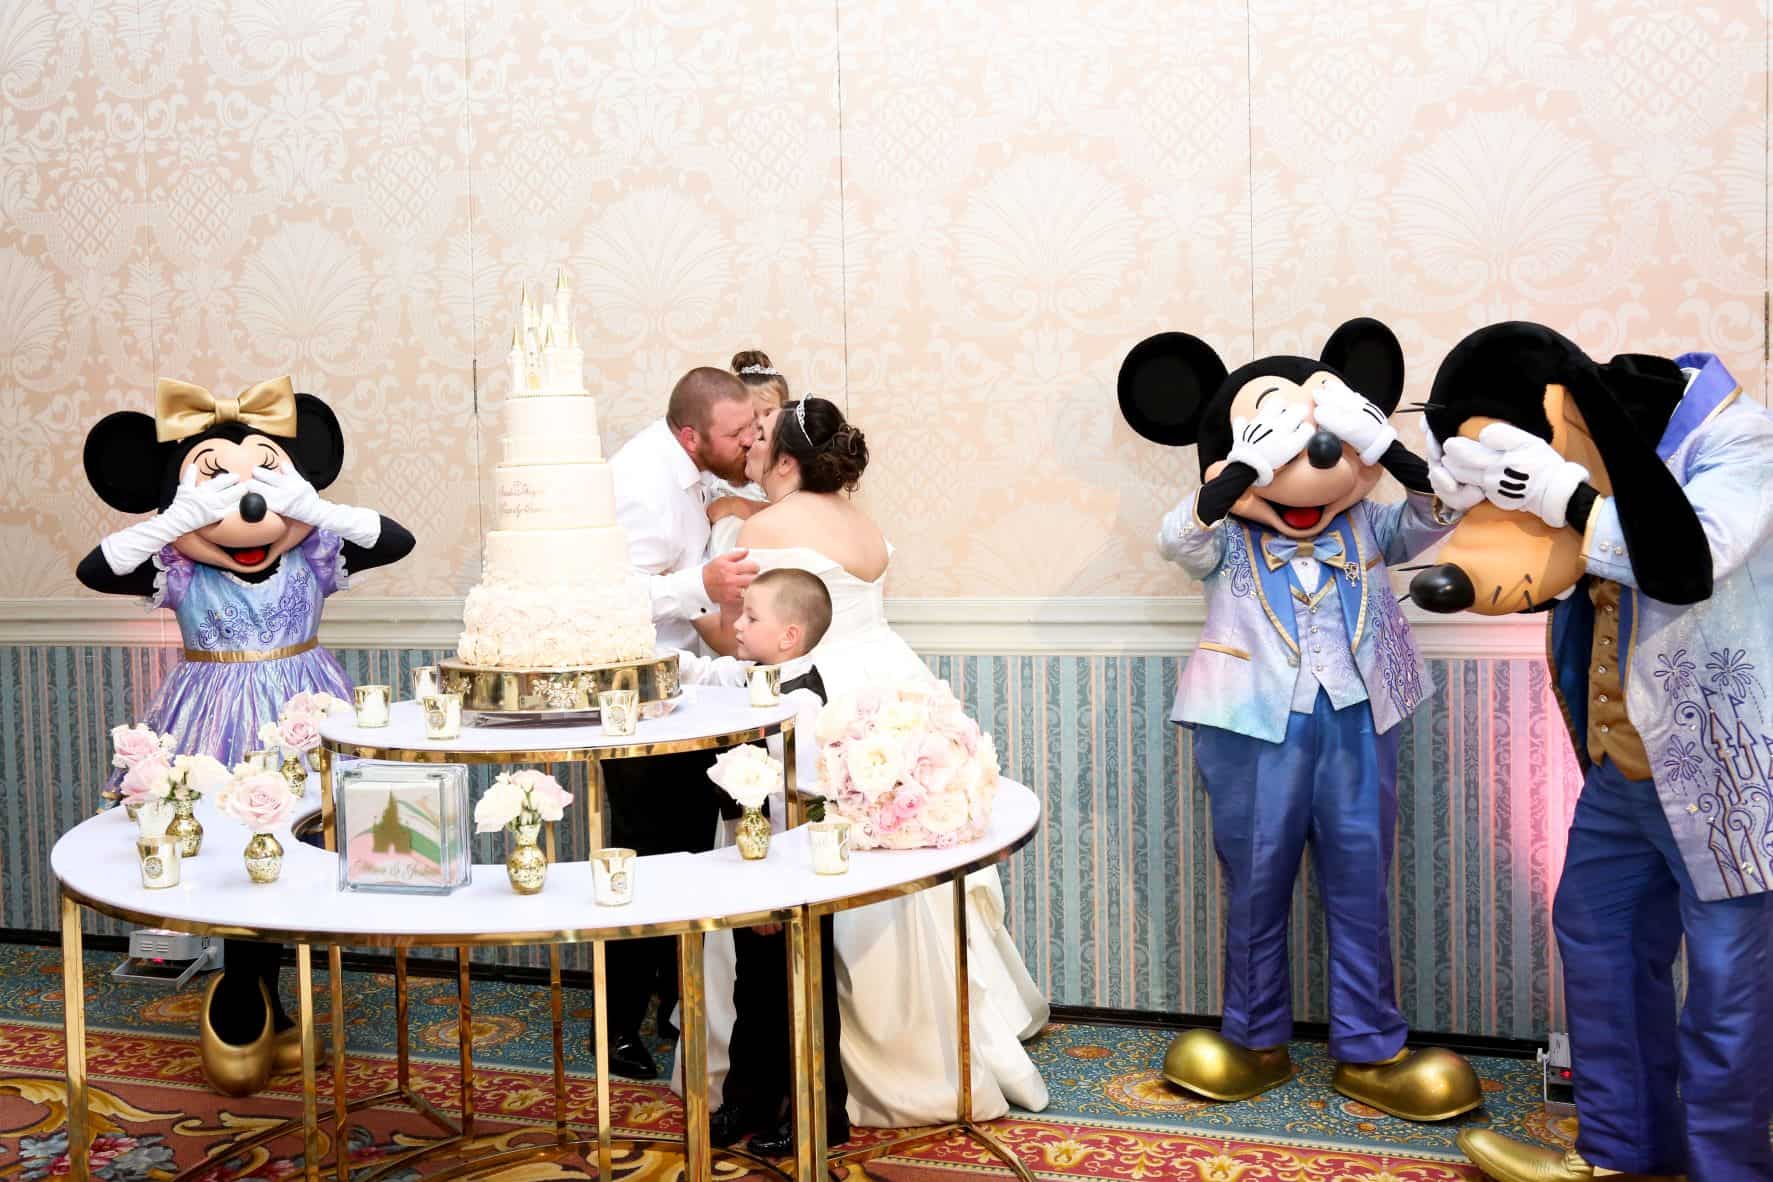 Disney Vow Renewal - Just Marry Weddings - Caldwell Photography - Reception Entertainment